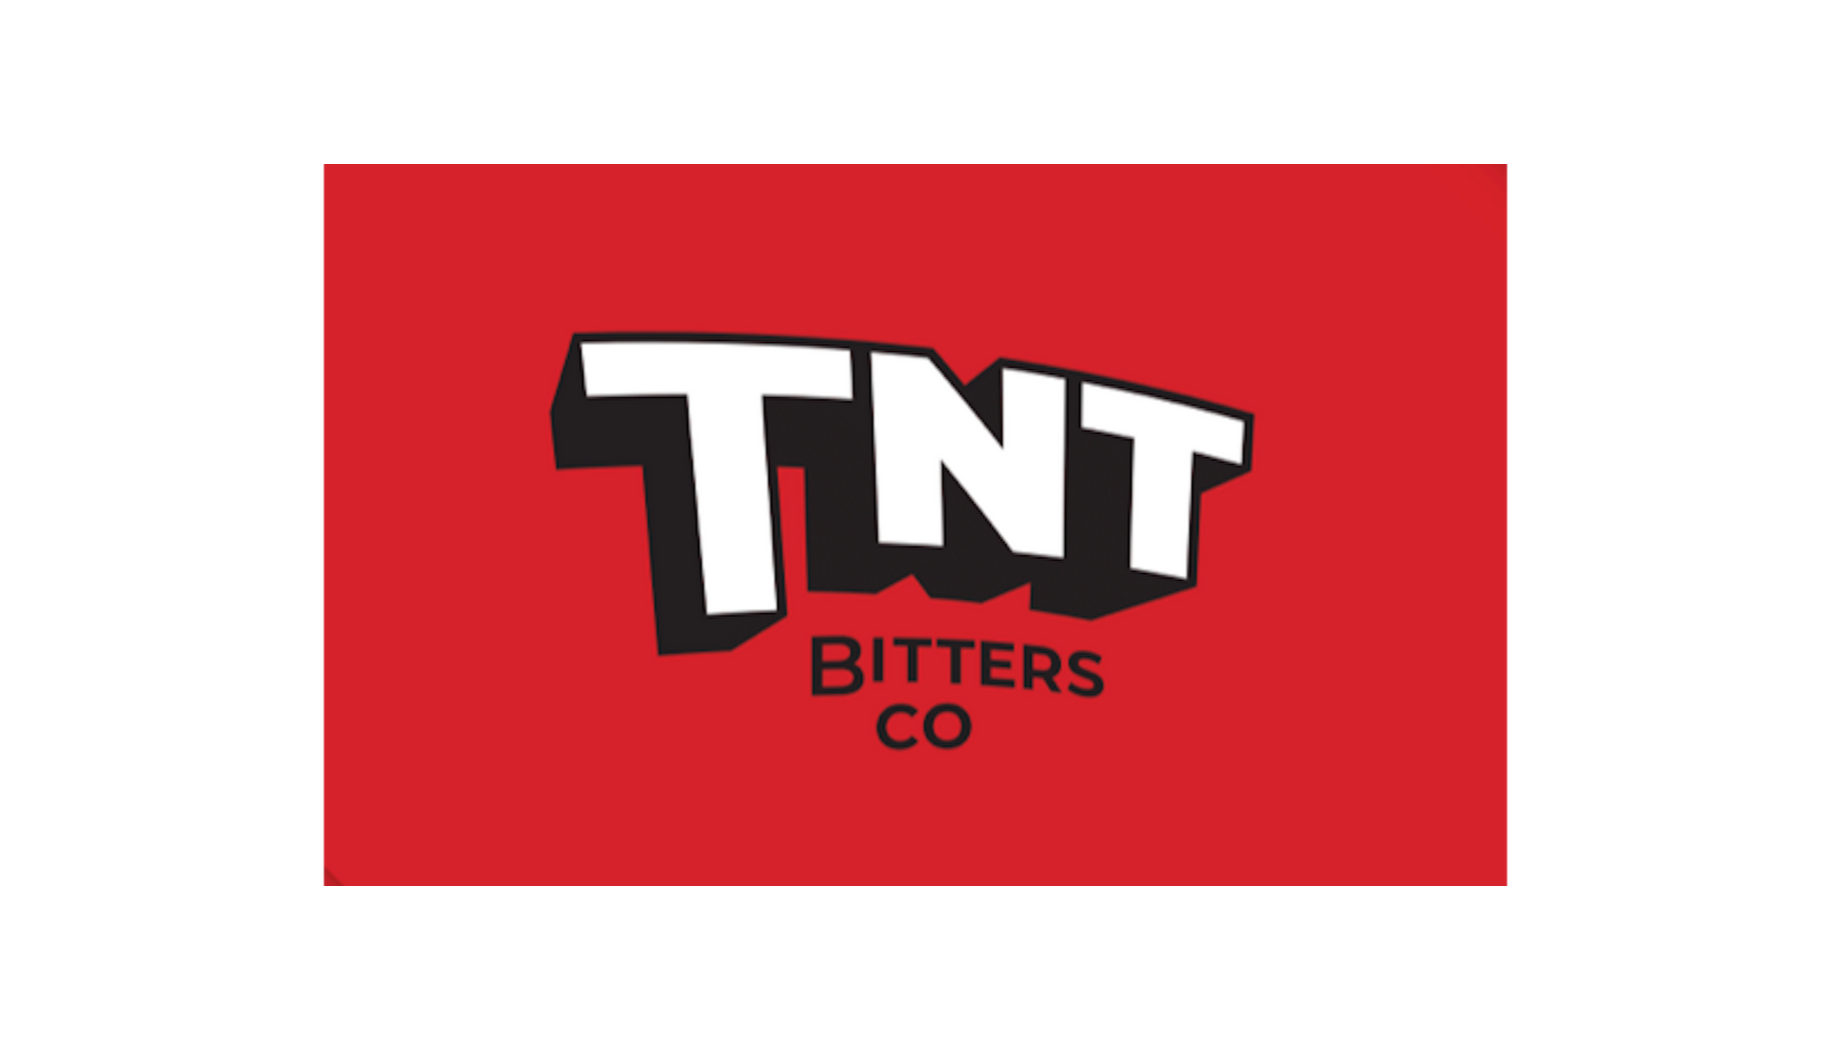 Hand Crafted Bitters - TNT Bitters